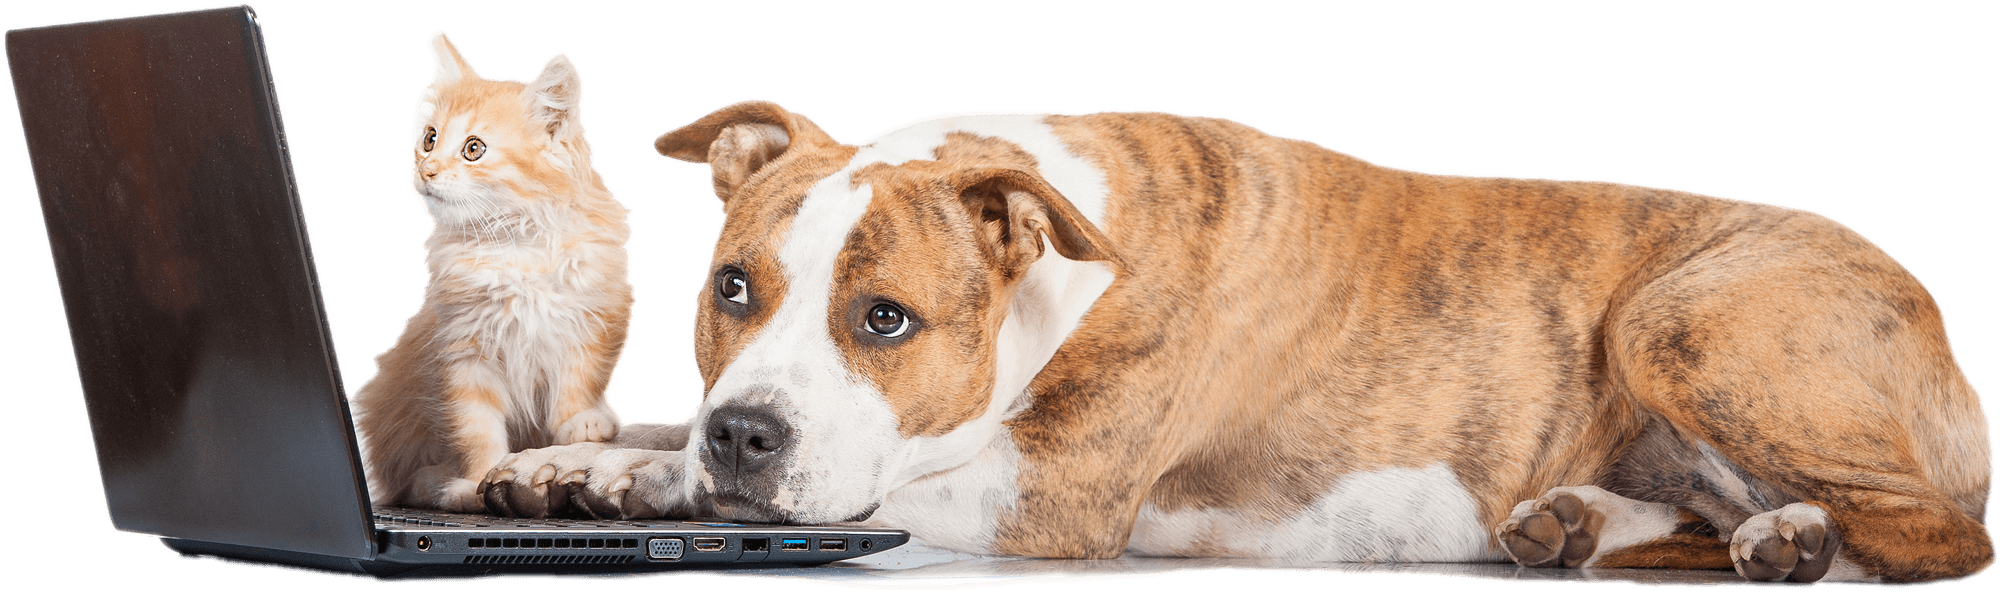 American Staffordshire terrier dog with little red kitten in front of a laptop